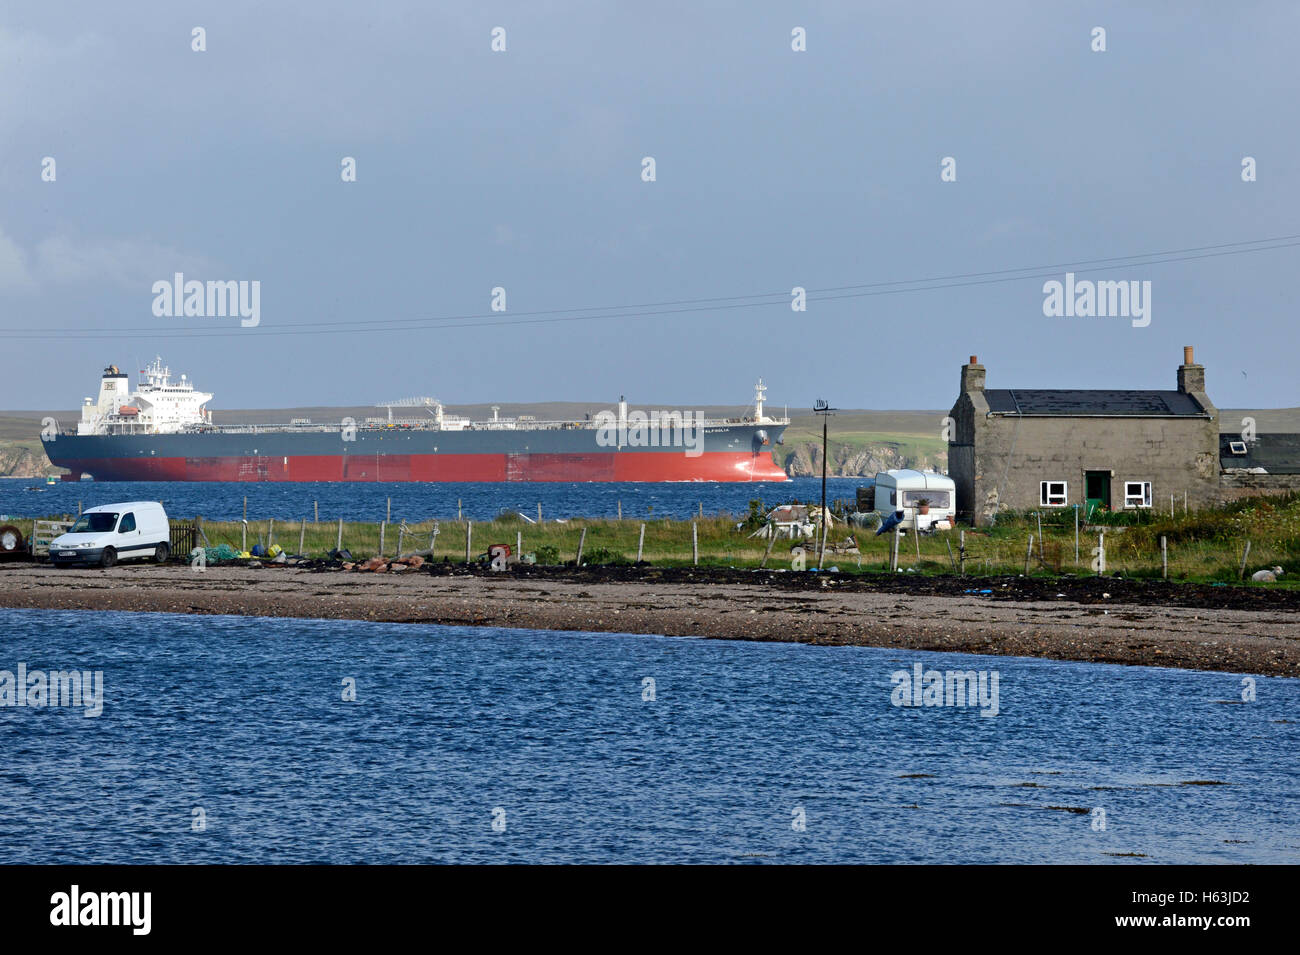 Oil Tanker entering the port of Sullom Voe to load Brent or Clair Crude oil from the north sea oil fields Stock Photo